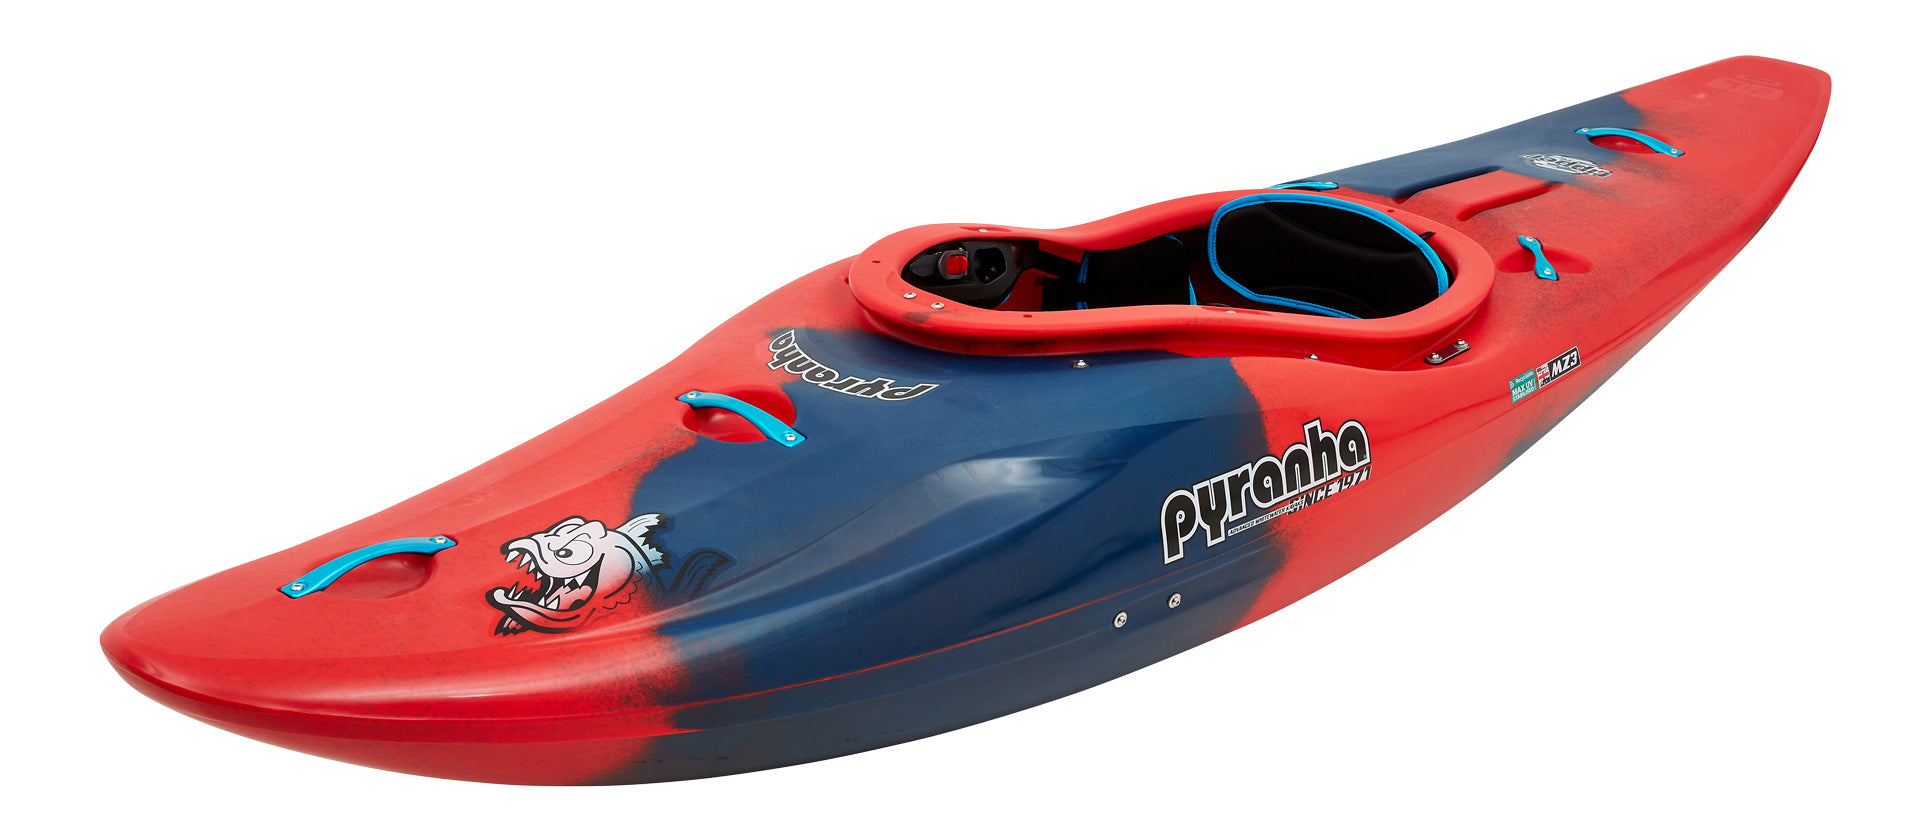 A Pyranha Ripper 2 kayak with a blue and red design is ideal for river running enthusiasts.